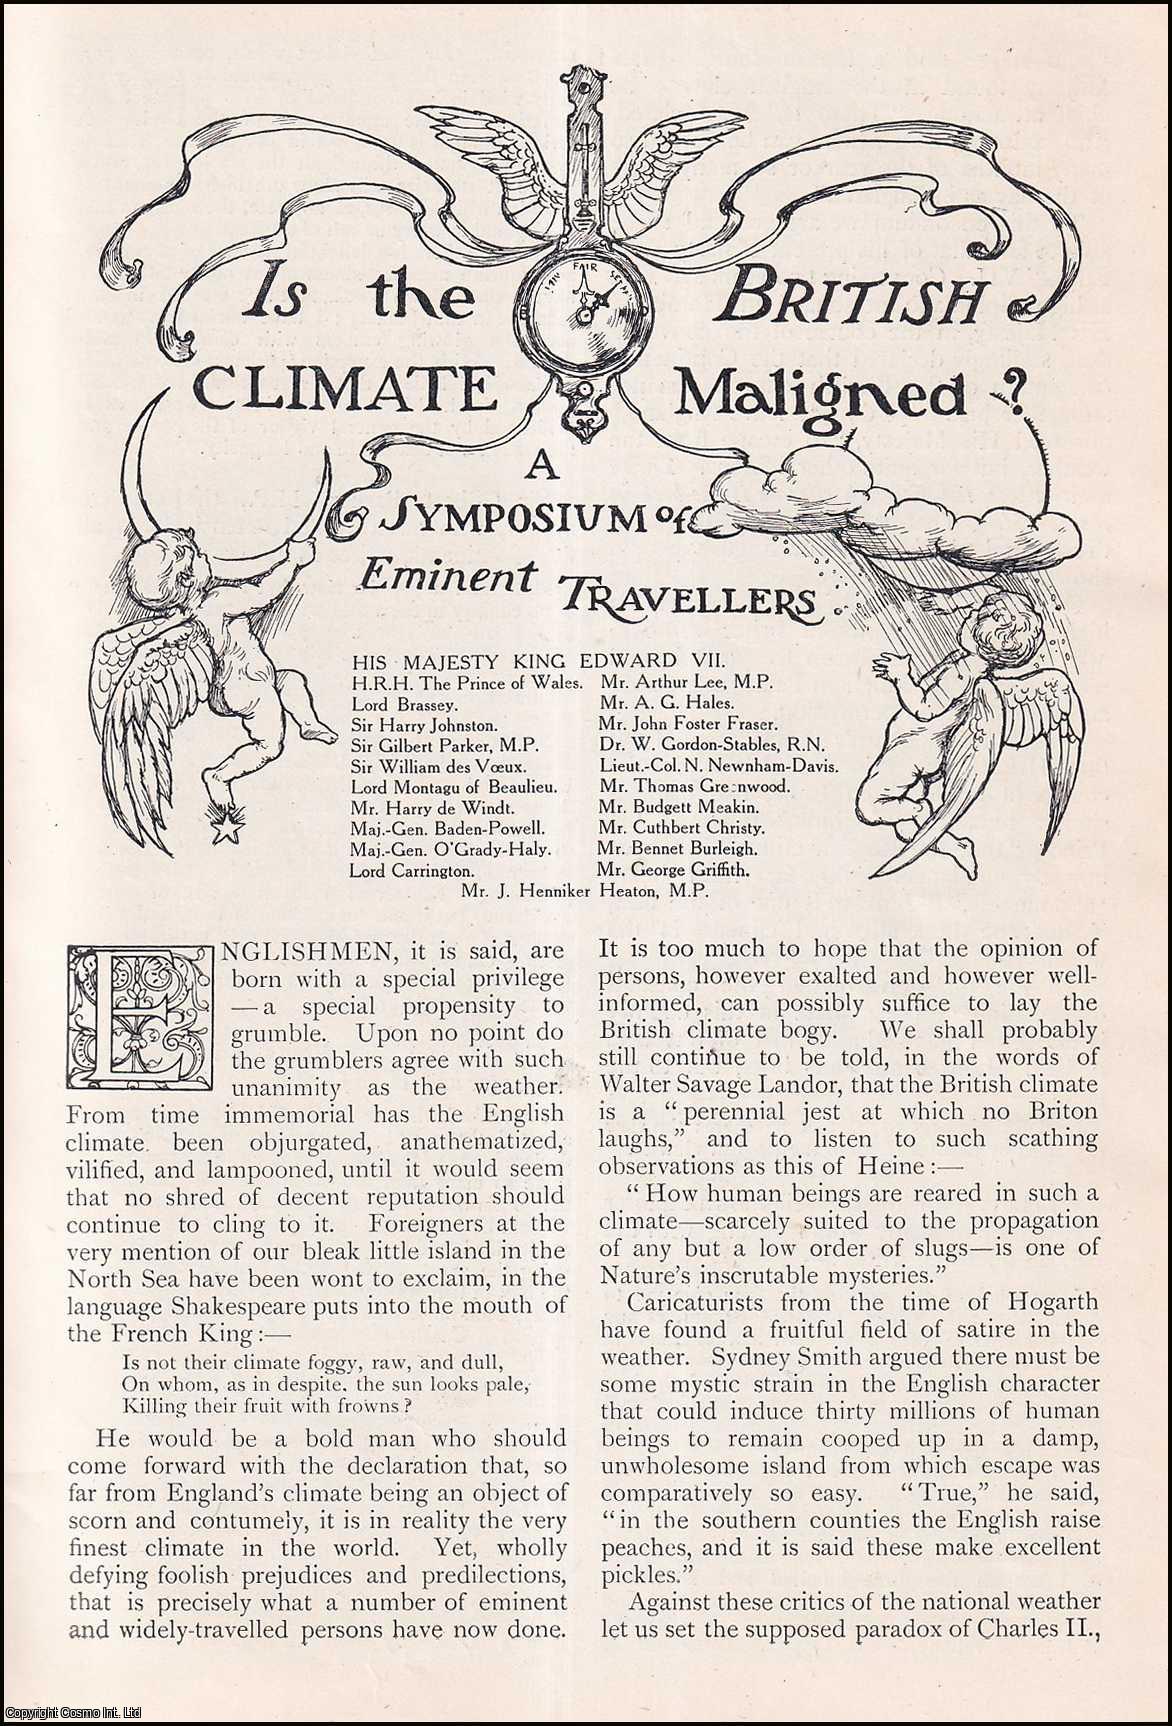 --- - Is The British Climate Maligned? A Symposium of Eminent Travellers. A rare original article from The Strand Magazine, 1906.